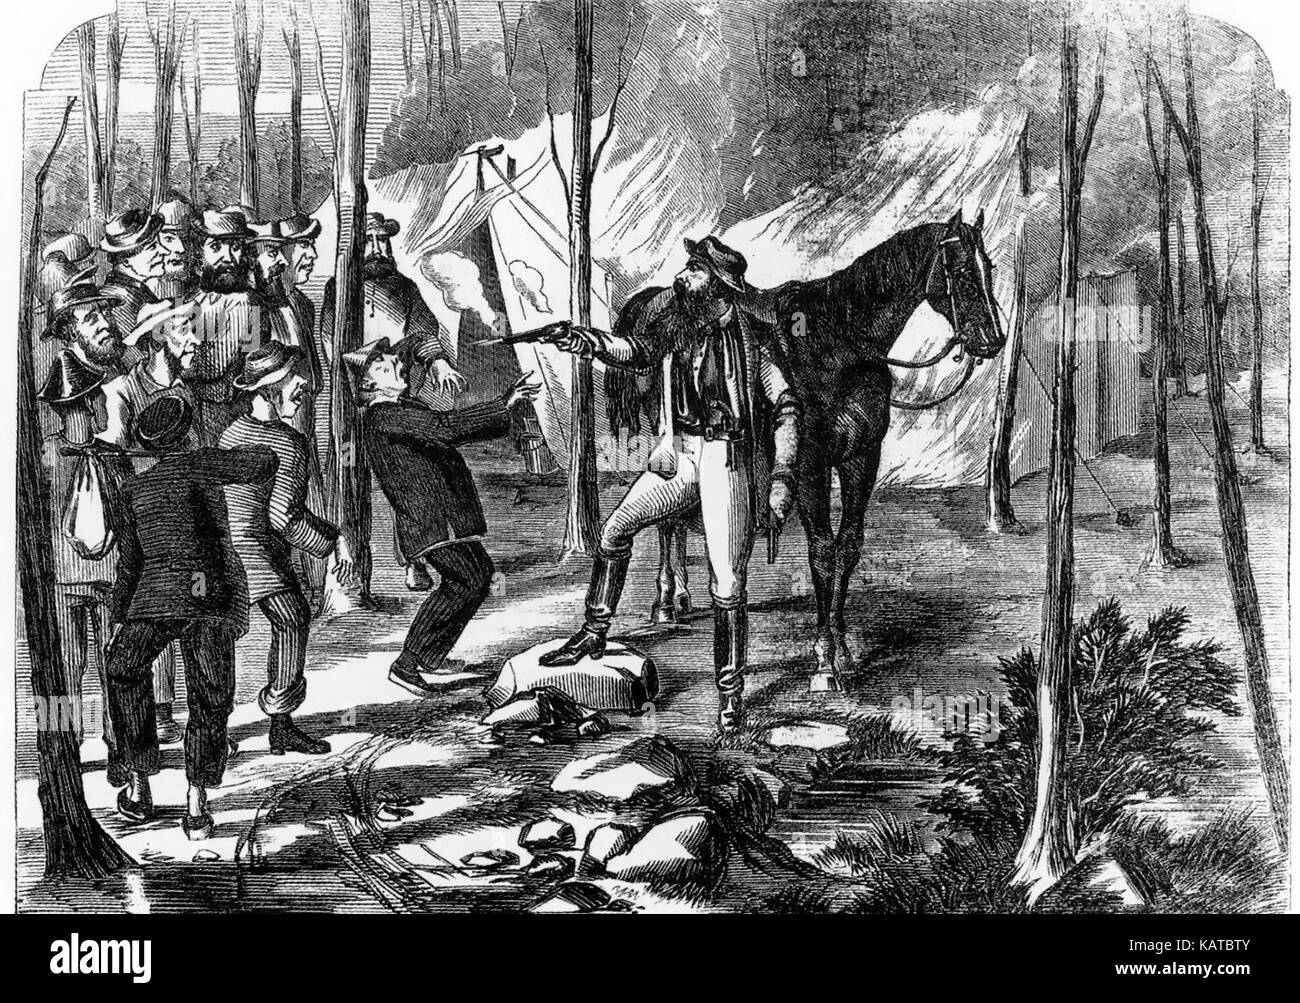 DANIEL MORGAN (1830-1865) Australian bushranger. Wood engraving by Samuel Calvert from the Melbourne Illustrated Post, 28 January 1865, entitled 'Morgan Sticking-up the Navvies, Burning their tents and Shooting the Chinaman Stock Photo